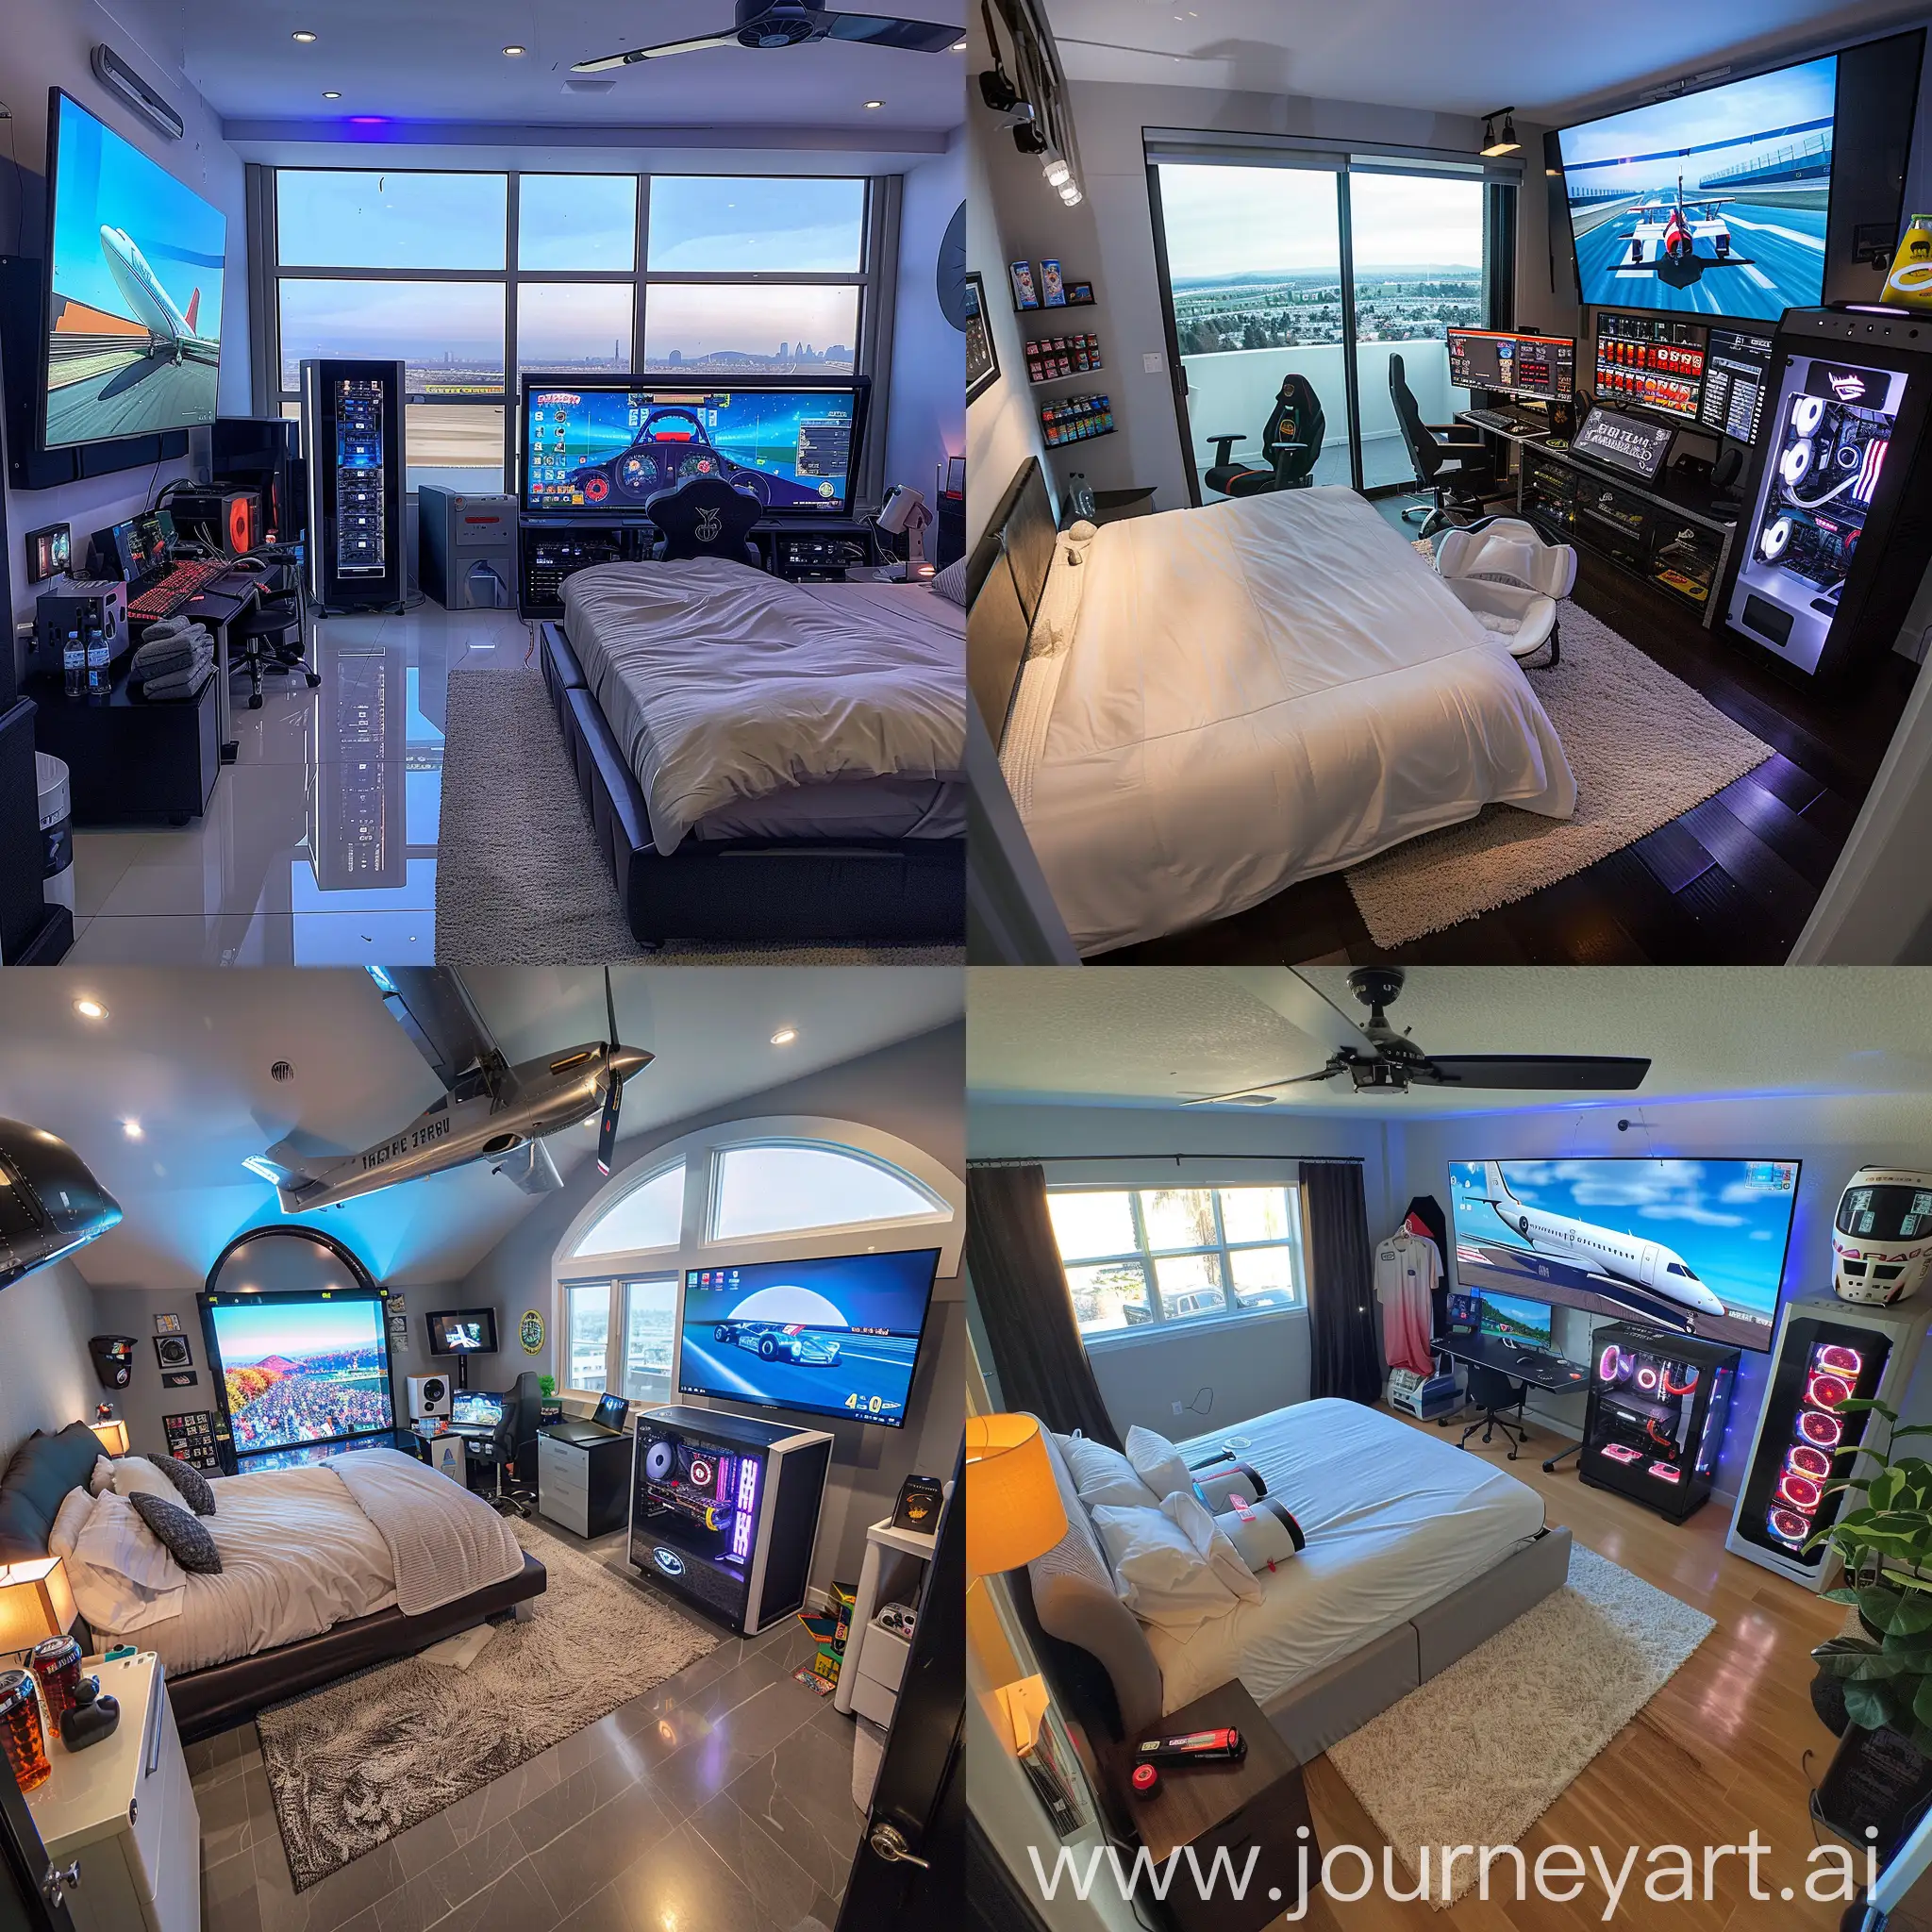 A big Teenager's room with airplane simulator, bathroom, the big TV, racing simulator, king size bed, a really cool gaming PC, freezer with soda. One huge window.